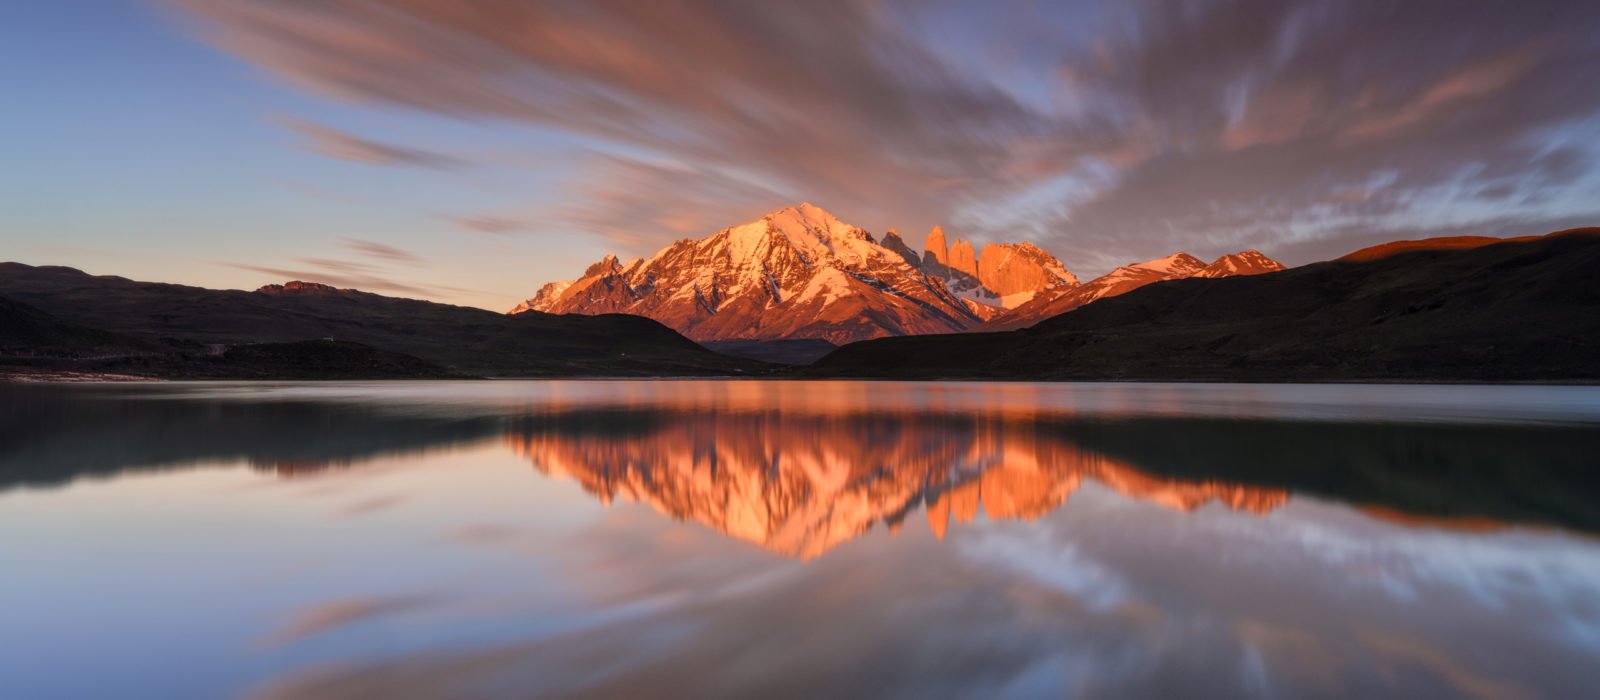 Snow-capped mountain reflecting in the water at sunset, Torres del Paine